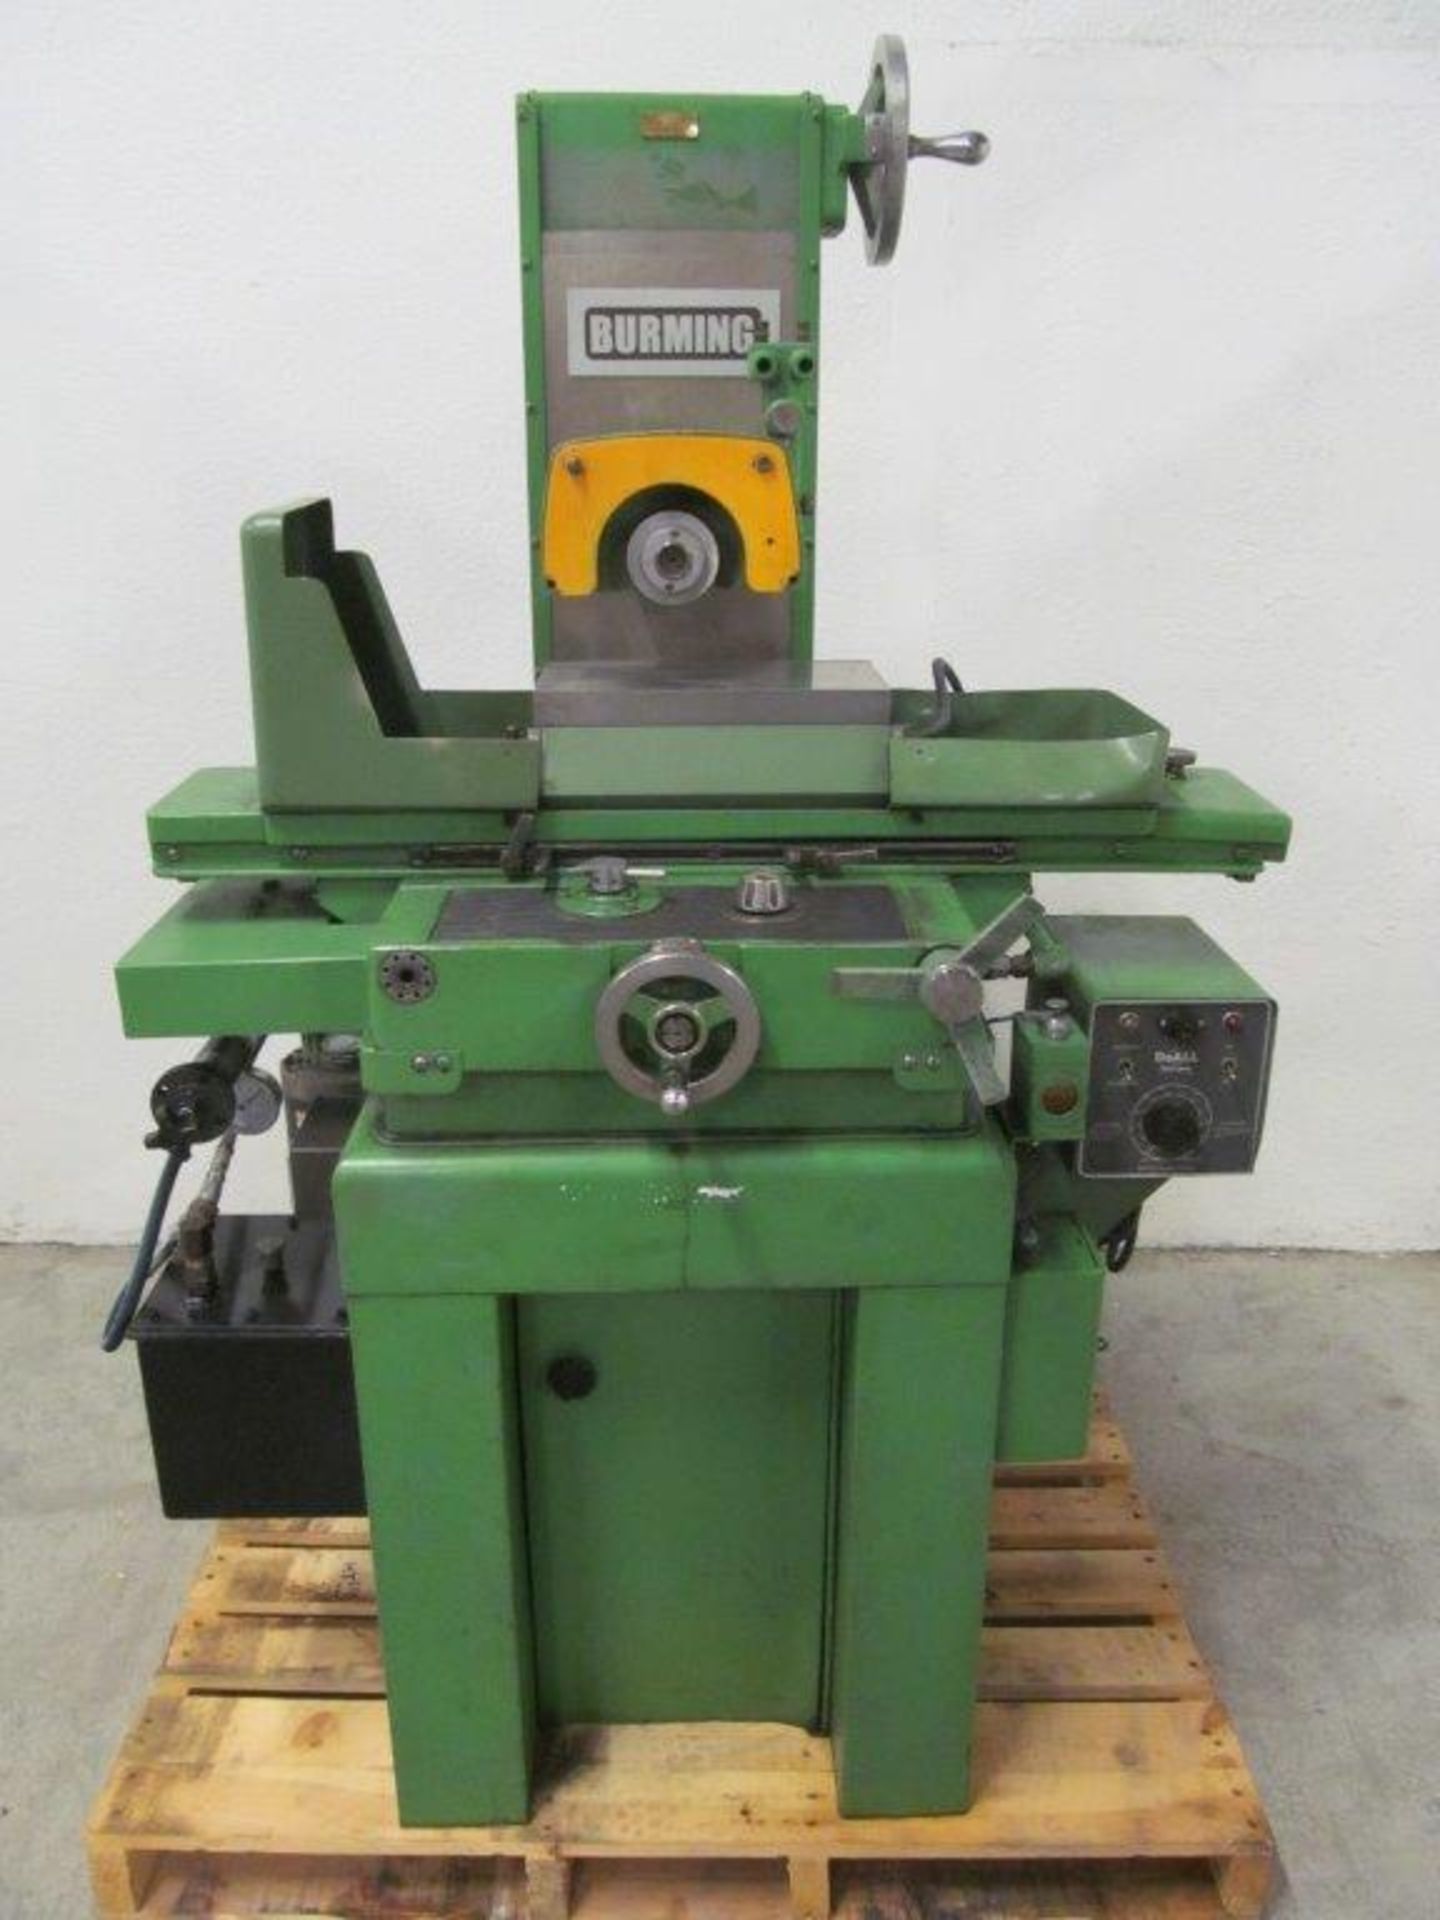 BURMING HYDRAULIC SURFACE GRINDER 6'' X 12'', C/W MAGNETIC CHUCK - Image 2 of 5